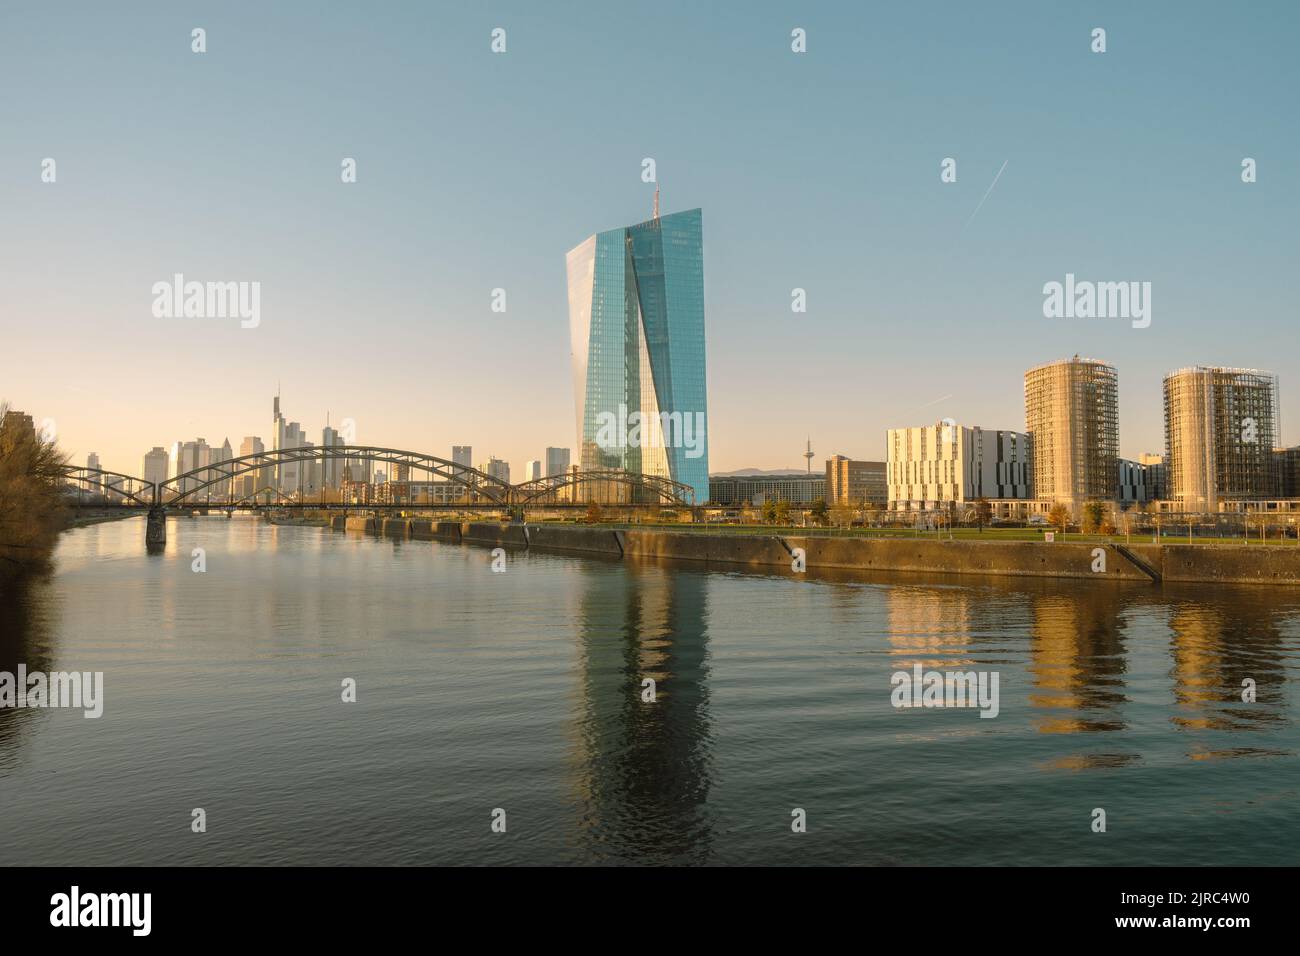 European central bank reflecting on the river main on a beautiful summer evening Stock Photo